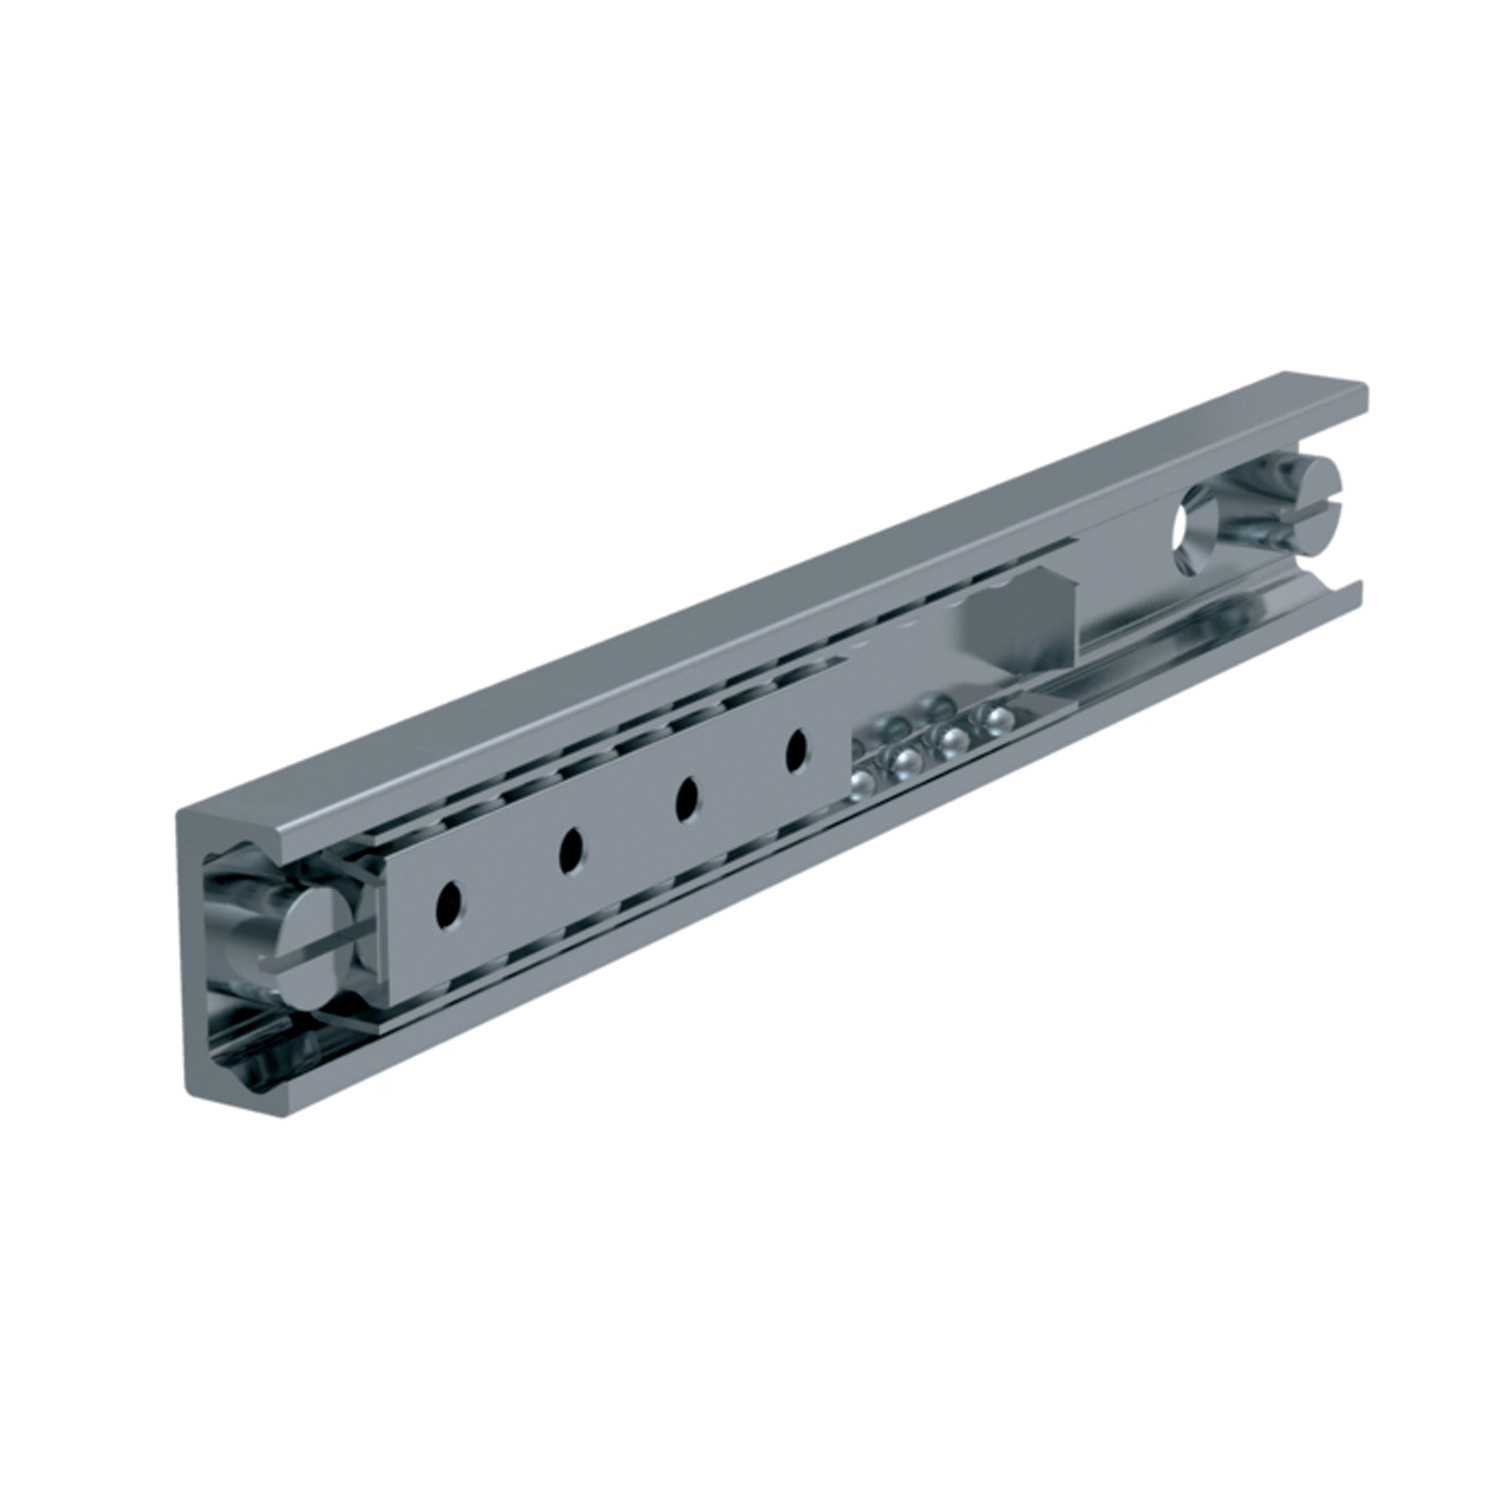 High Load Rails Easy slide high-load rails come in sizes 28, 35, 43 or 63. They are made from zinc-plated steel with induction-hardened steel raceways.